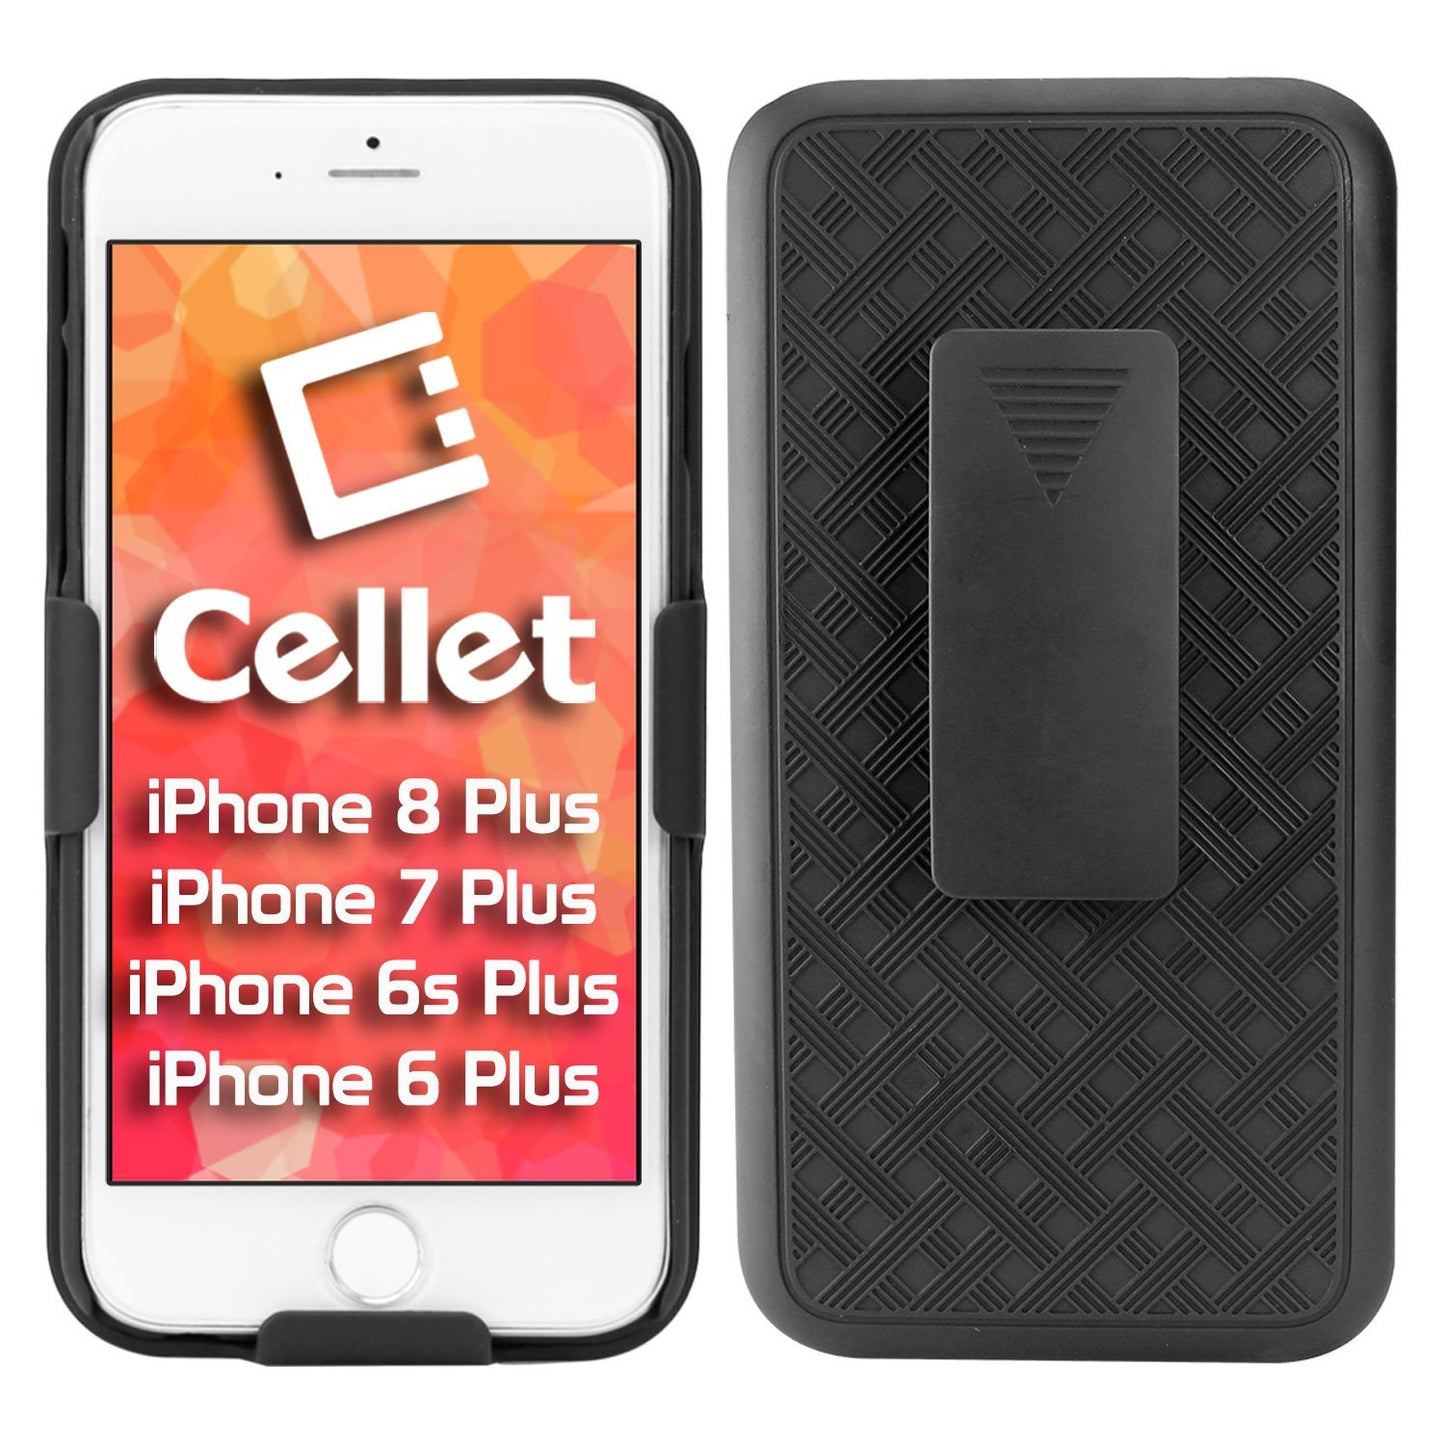 HLIPH7P - Cellet Shell Holster Kickstand Case with Spring Belt Clip for Apple iPhone 8Plus, 7Plus, 6S Plus, & 6Plus